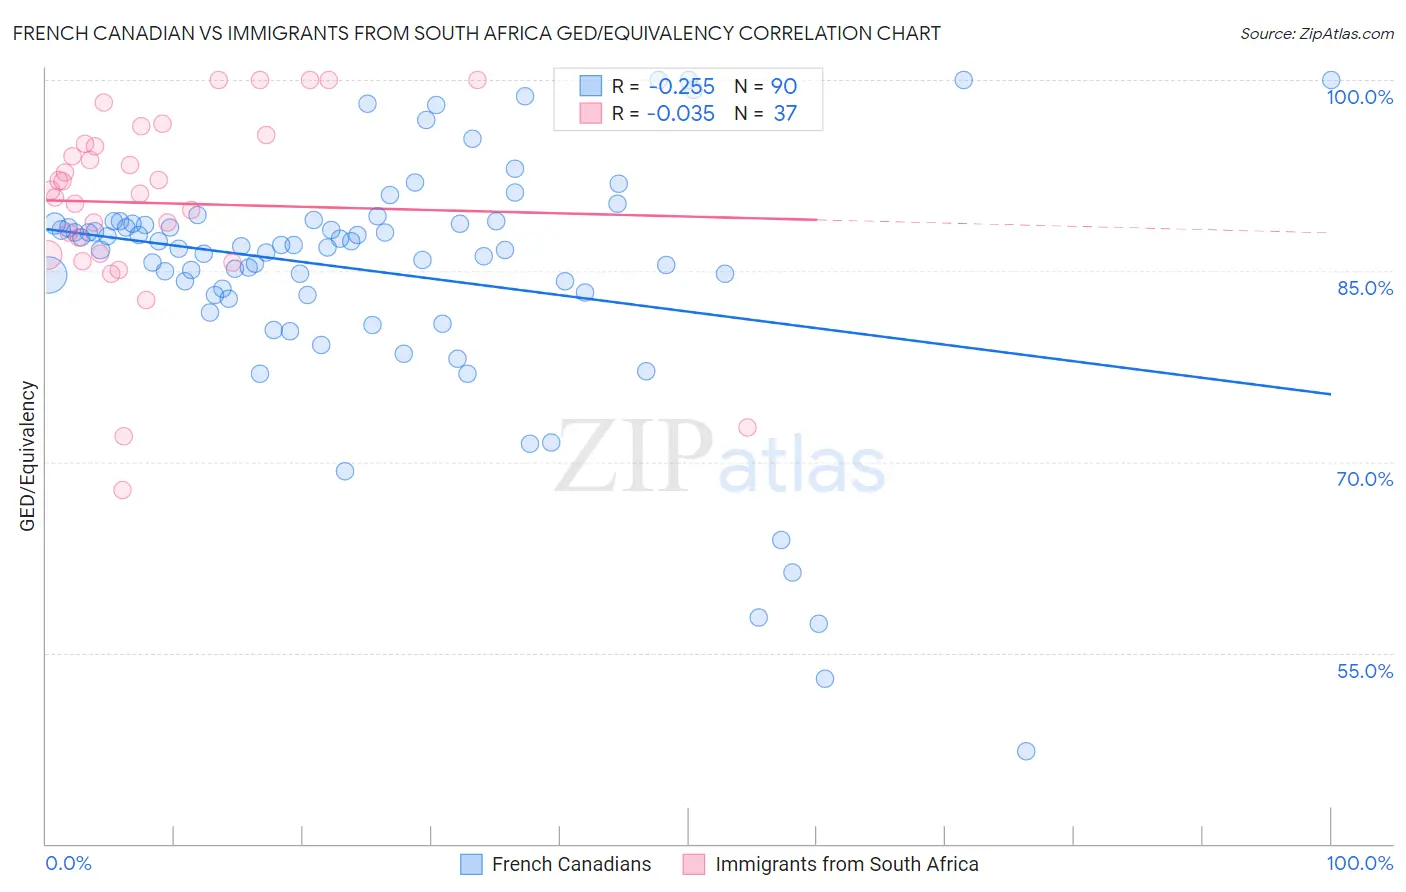 French Canadian vs Immigrants from South Africa GED/Equivalency